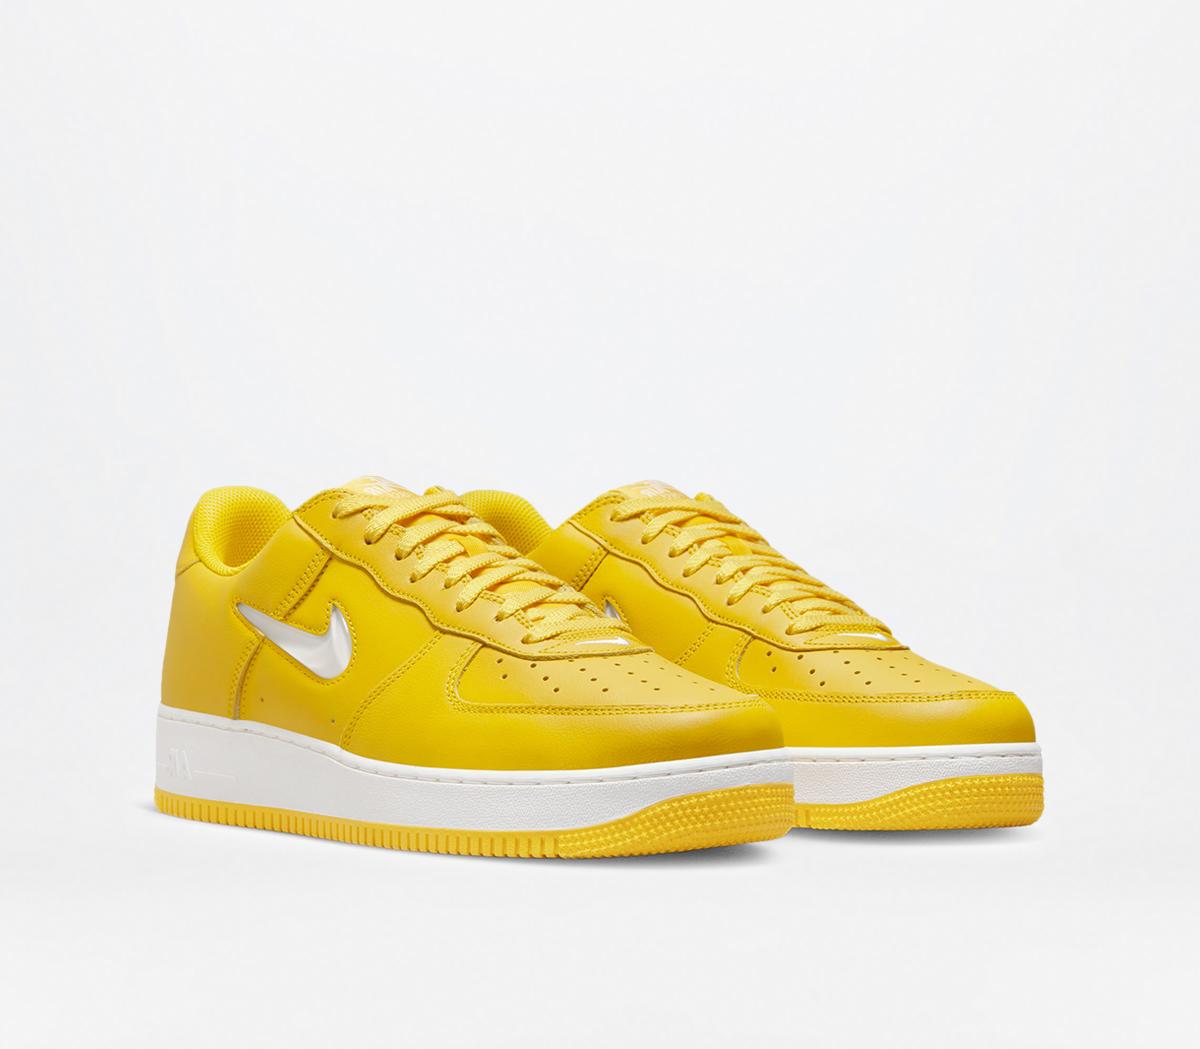 Nike Air Force 1 07 Trainers Speed Yellow Summit White - Men's Trainers